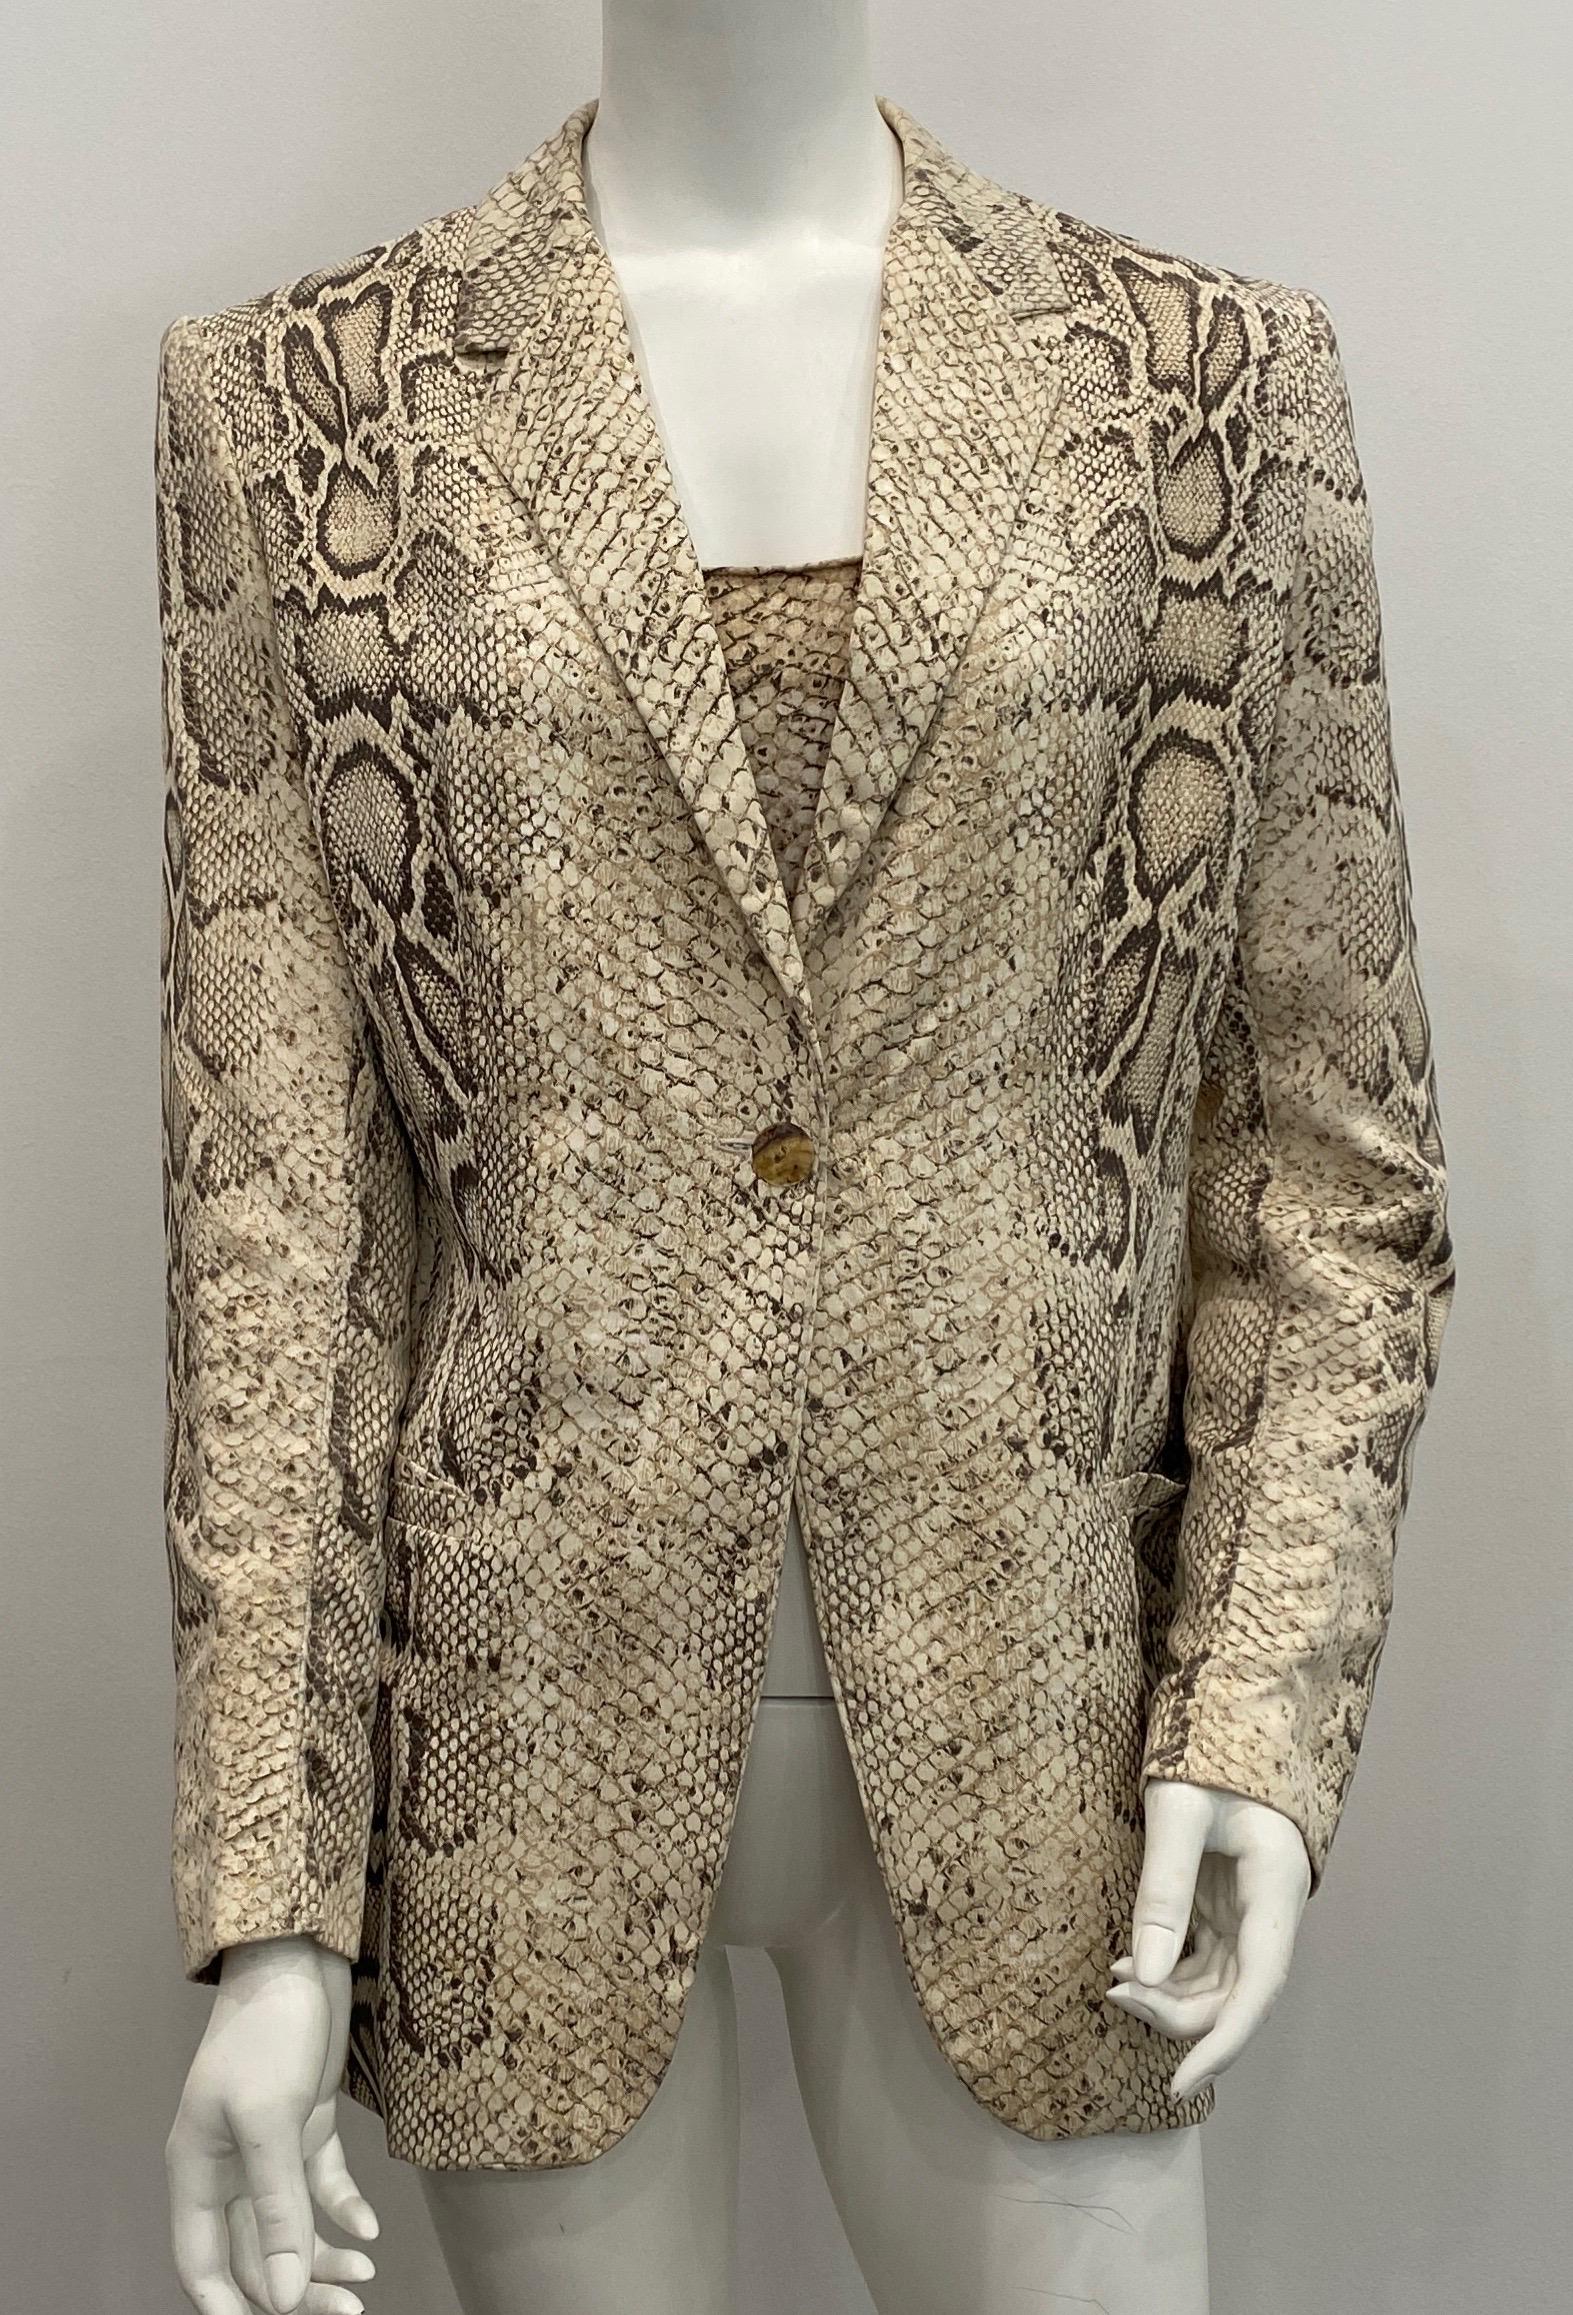 Roberto Cavalli Python Print - Size Medium . This vintage fully lined single breasted jacket has a single button front button, 2 non-functional buttons on each sleeve and 2 front functional pockets. The jacket also comes with a matching stretch